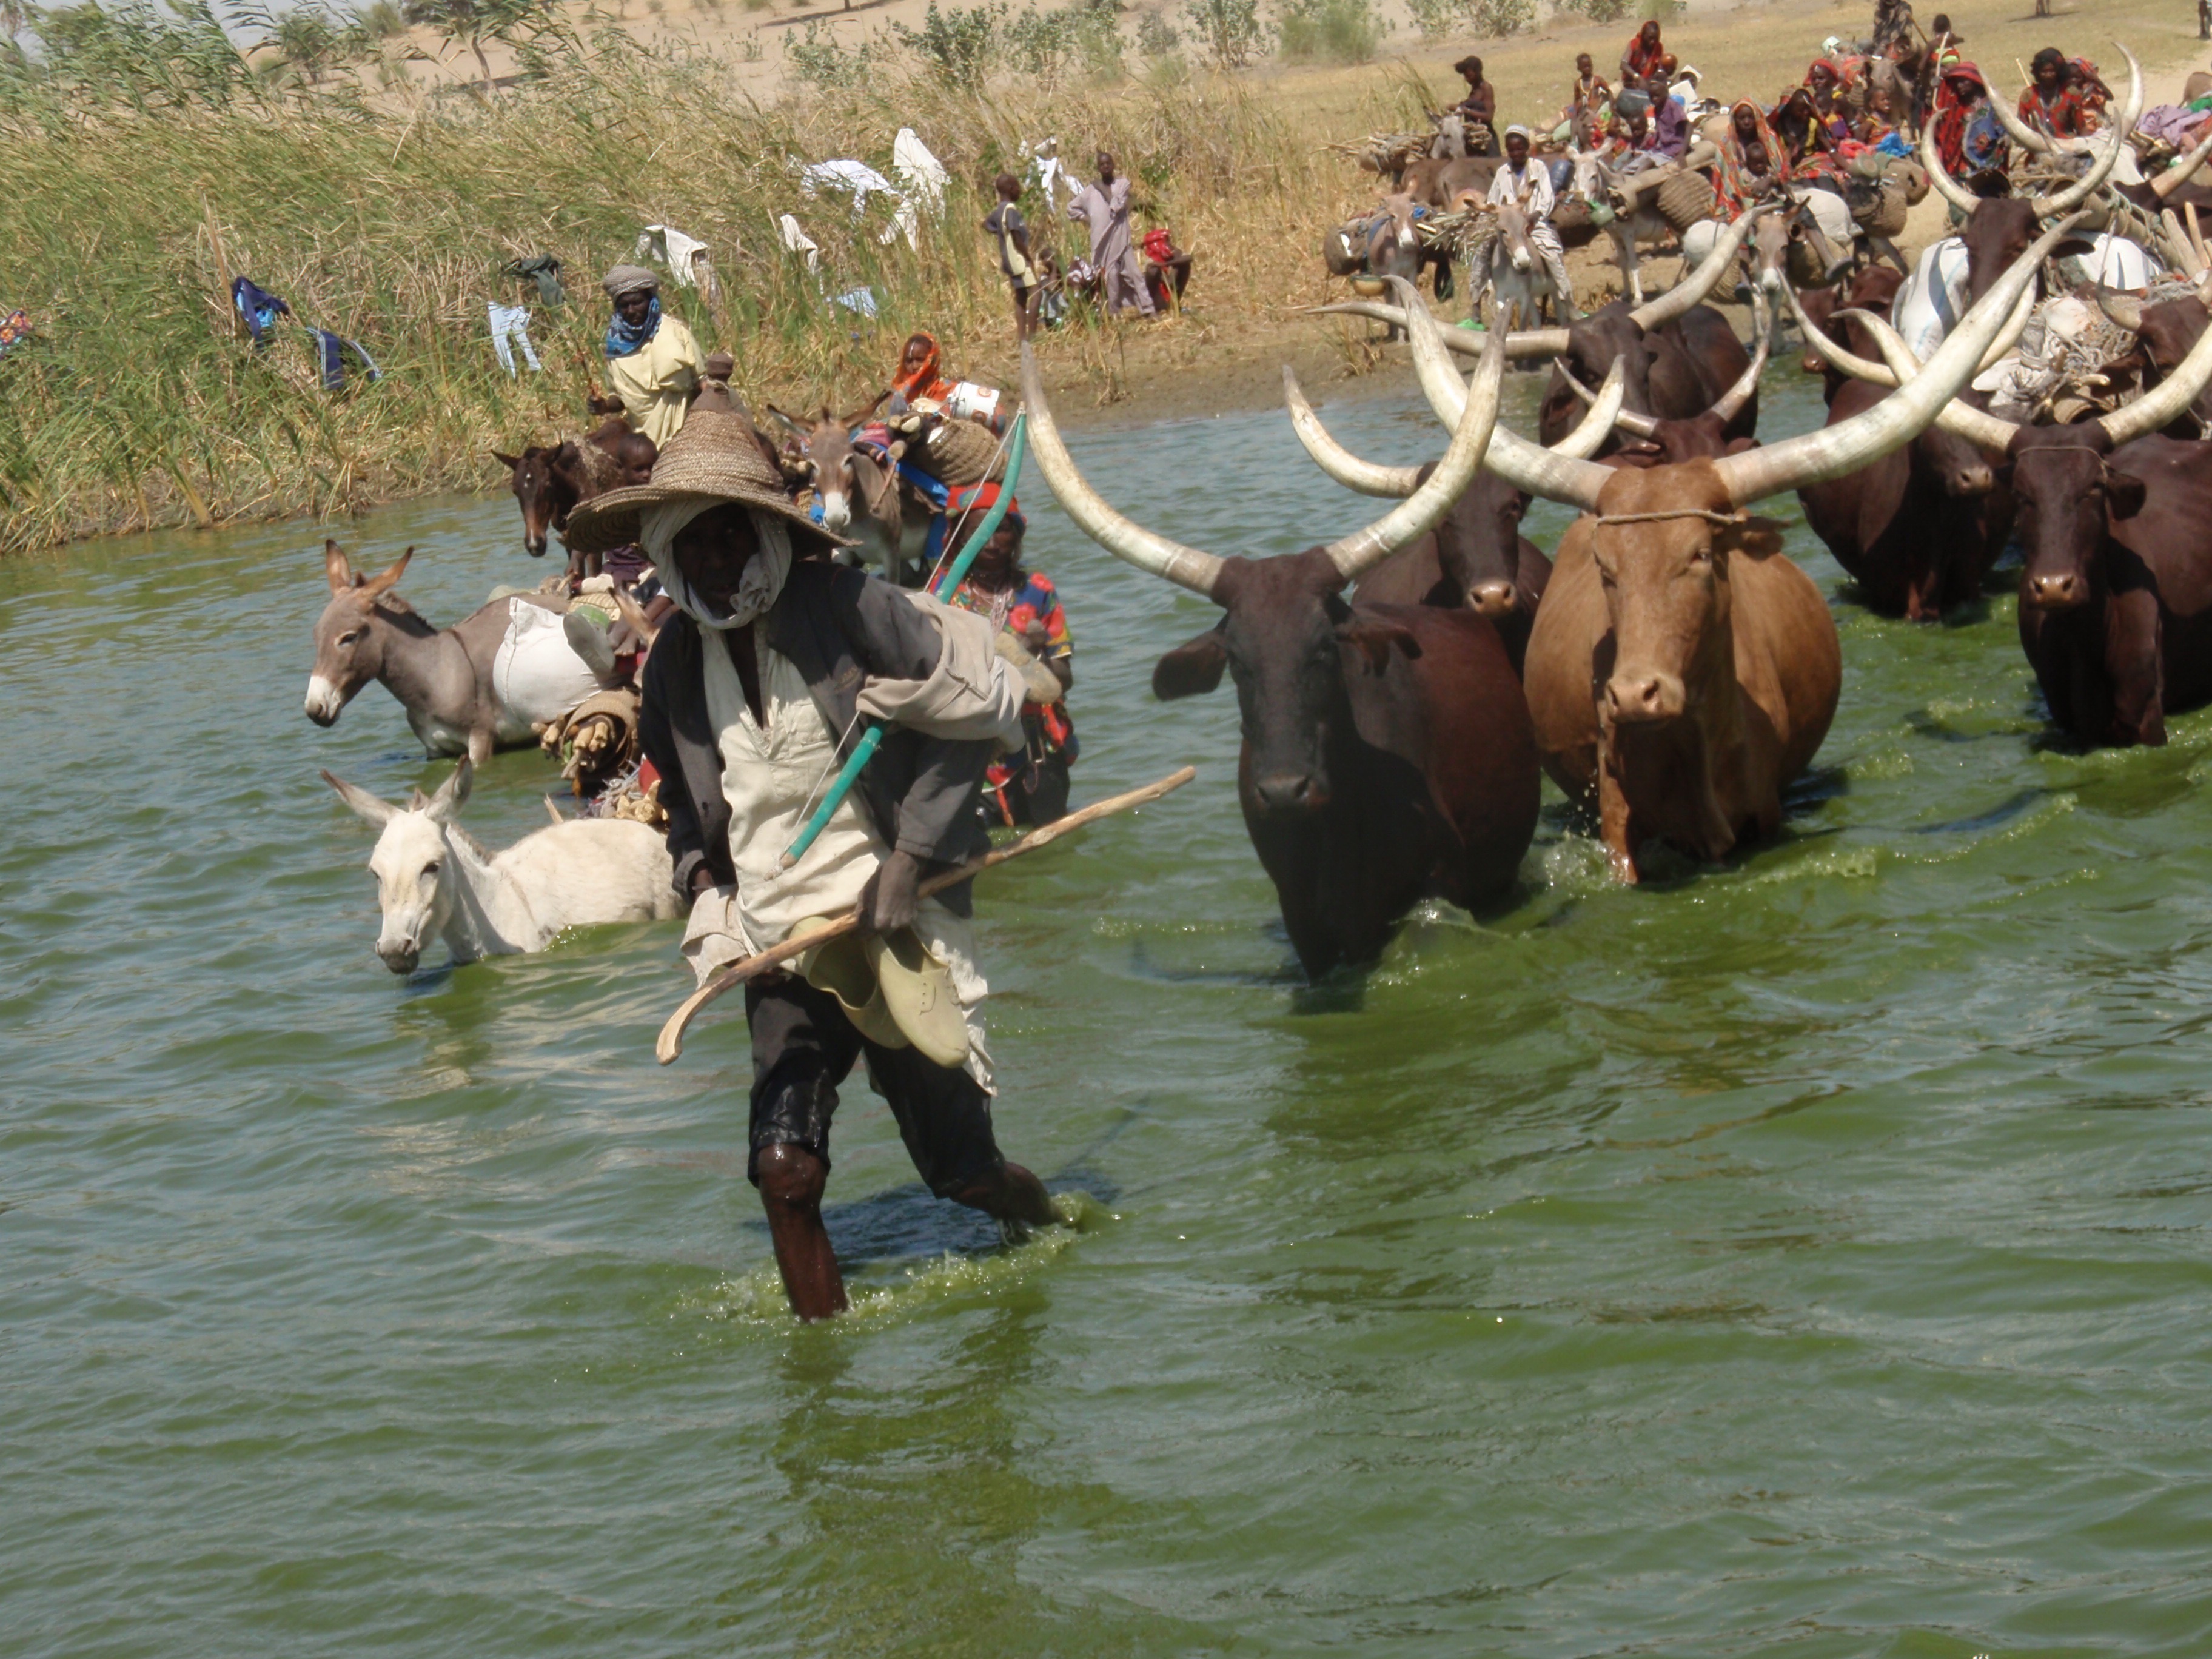 One killed by Ambororo nomads in Ibba County